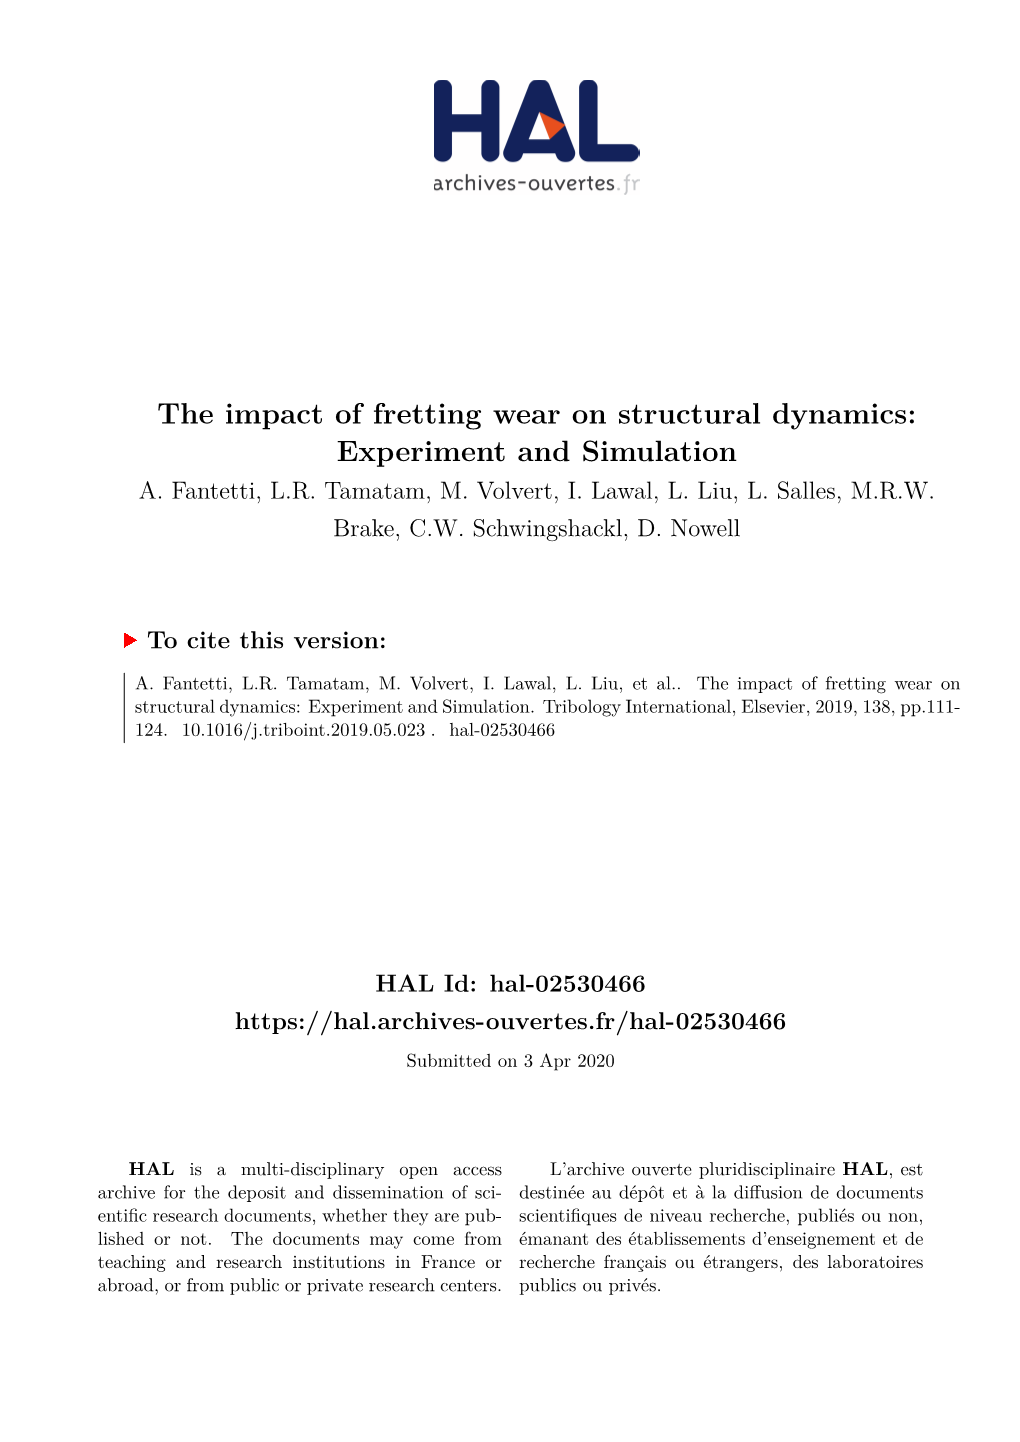 The Impact of Fretting Wear on Structural Dynamics: Experiment and Simulation A